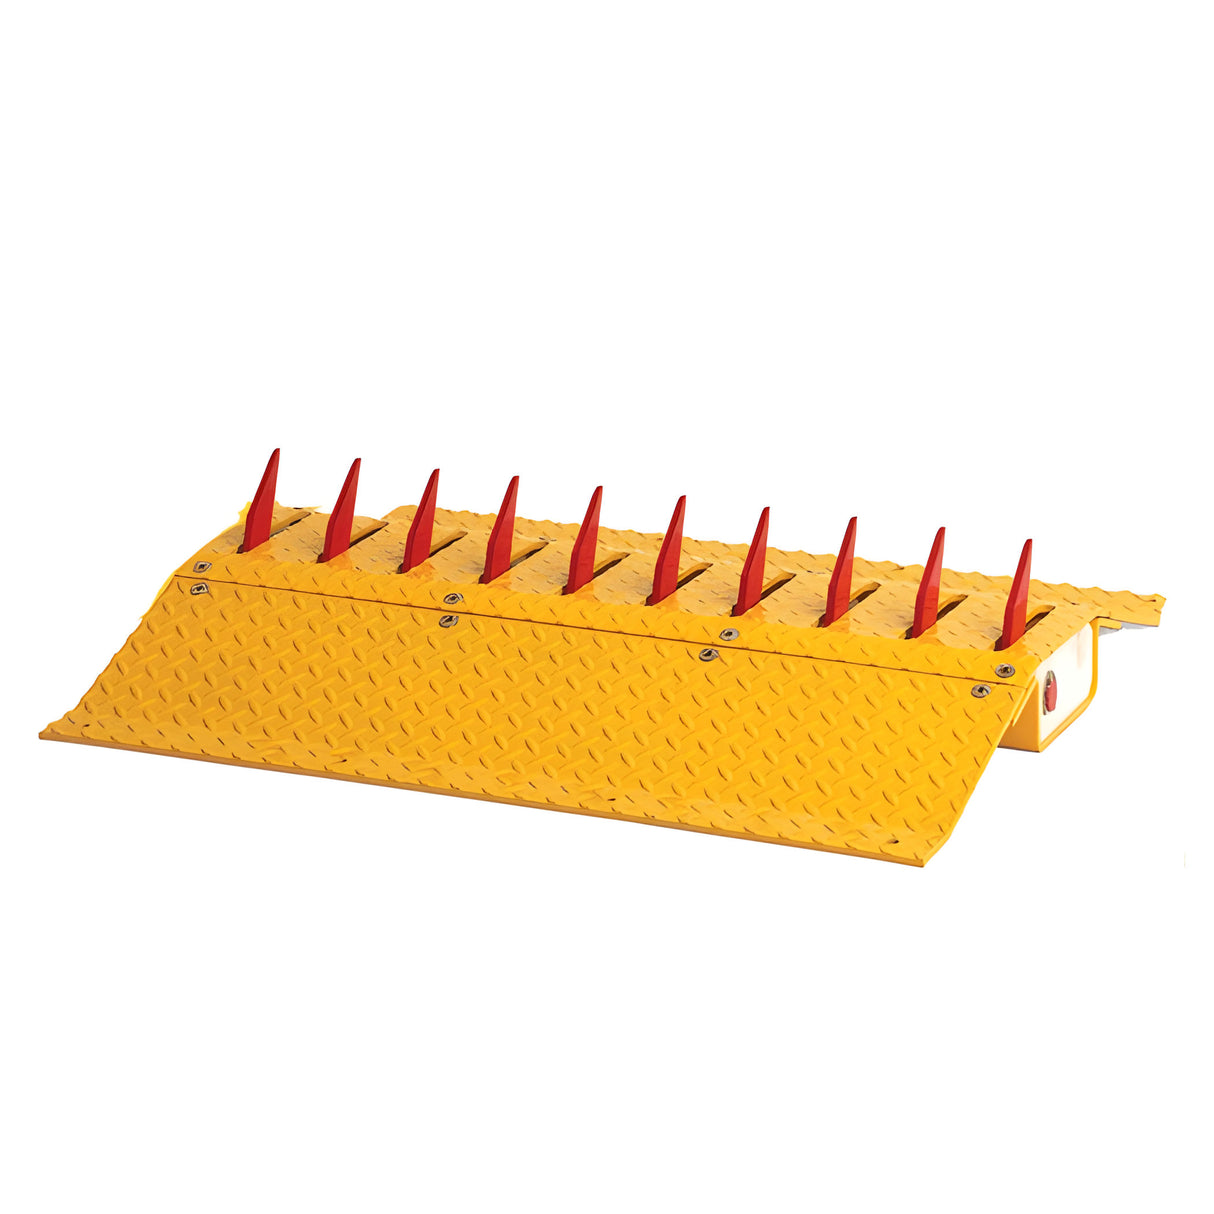 Doorking 1610-088 Traffic Spikes (3ft section shown)